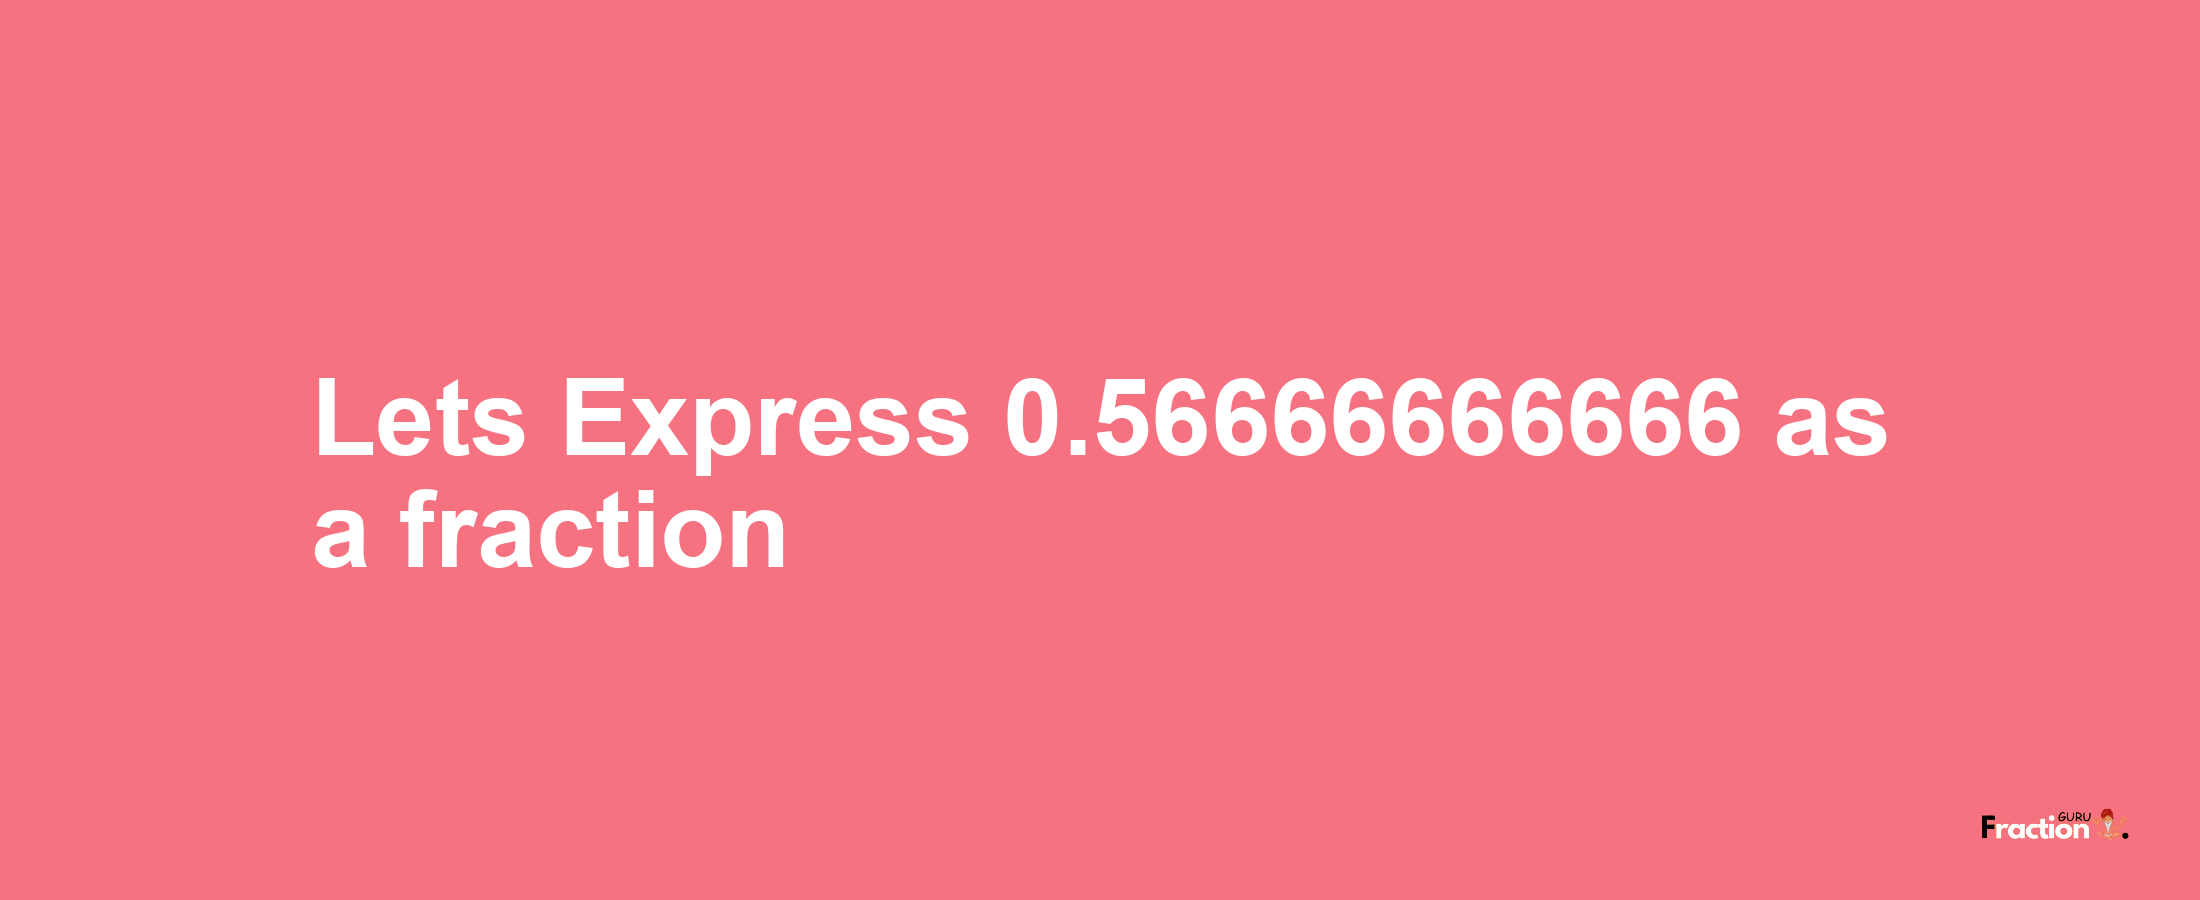 Lets Express 0.56666666666 as afraction